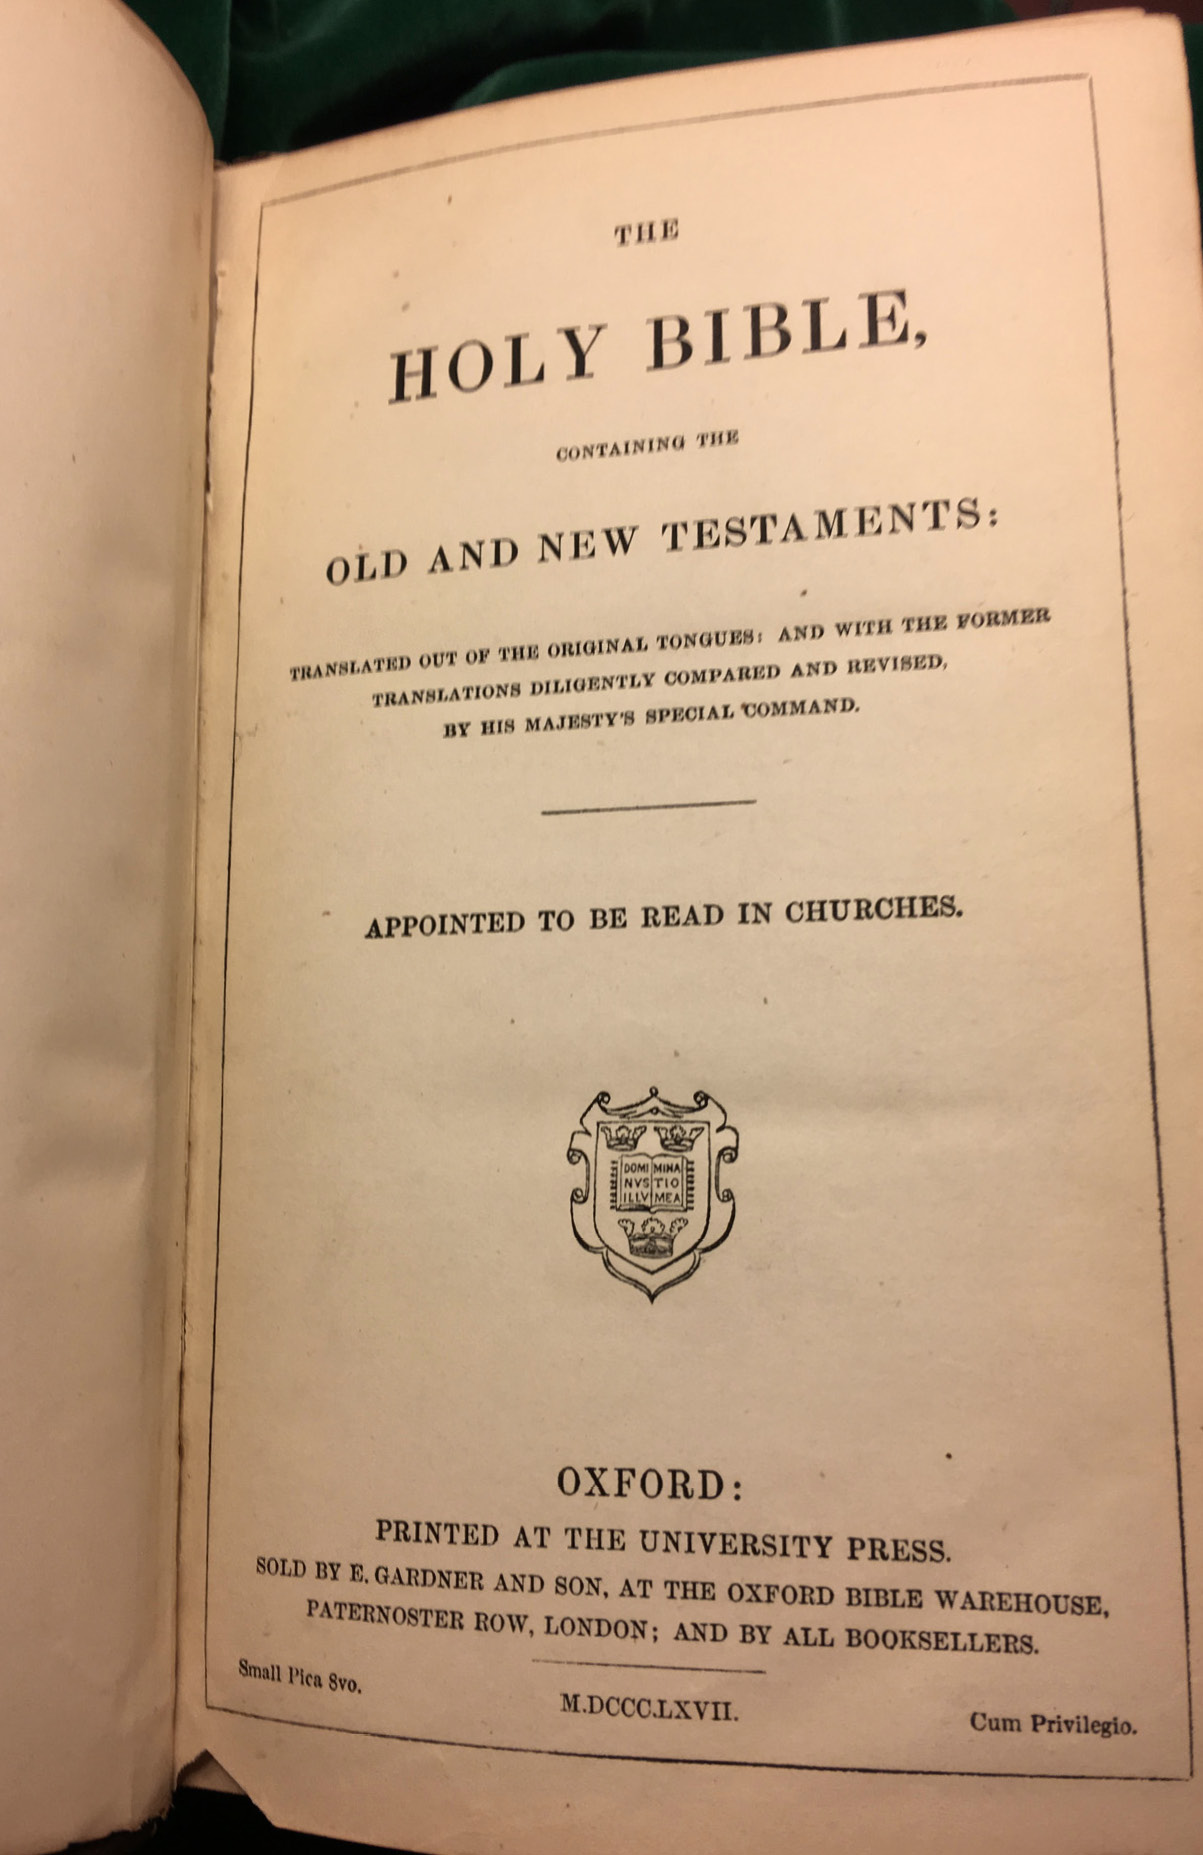 Title page of Oxford Holy Bible, black and white, austere in style.